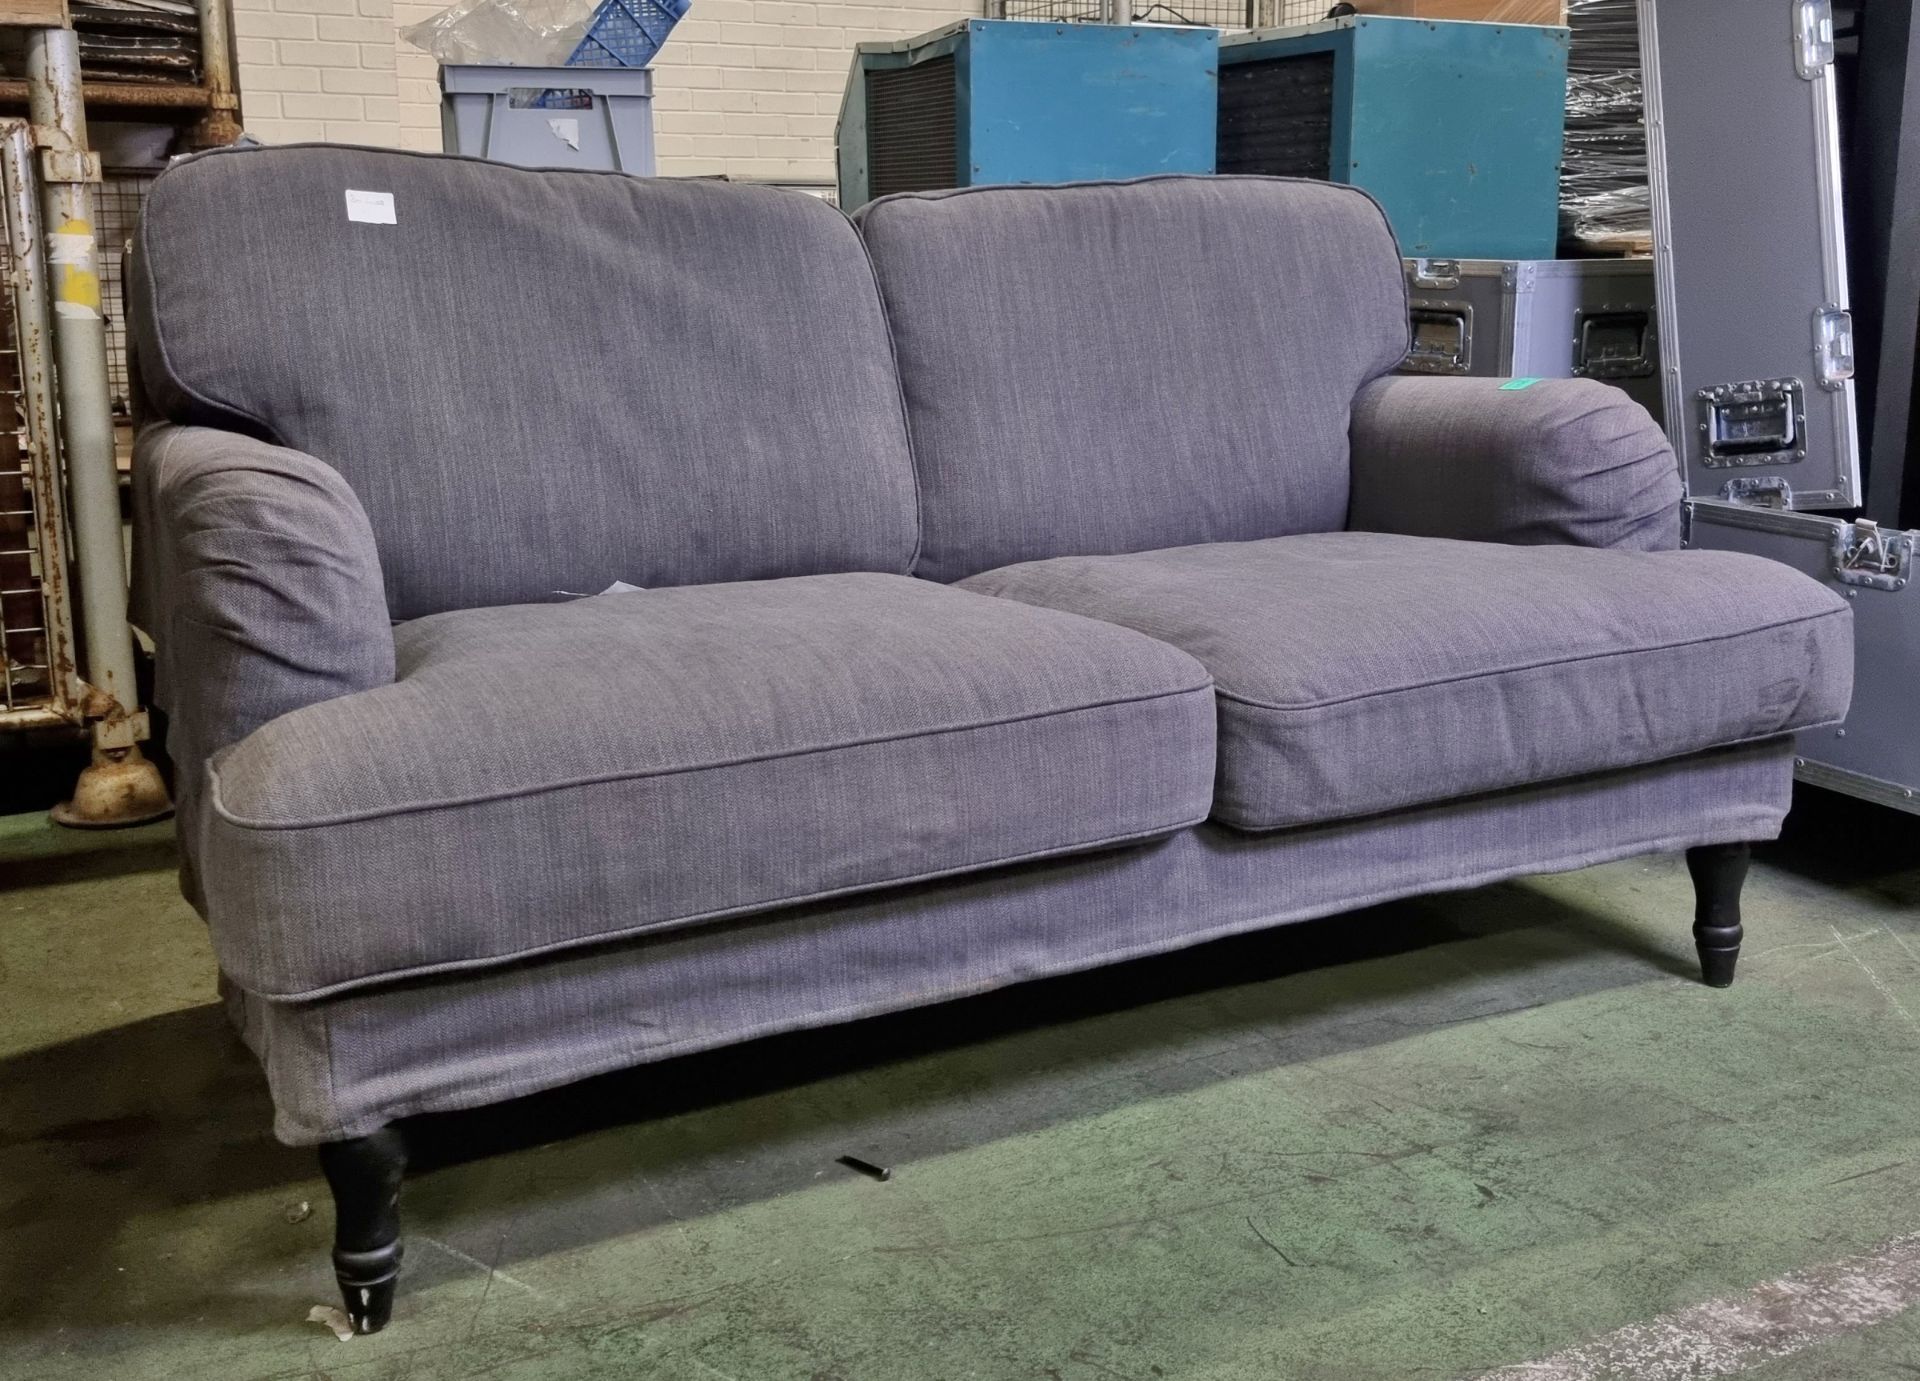 2 Seater Sofa - Grey - L1540 x W900 x H920mm - Image 3 of 3